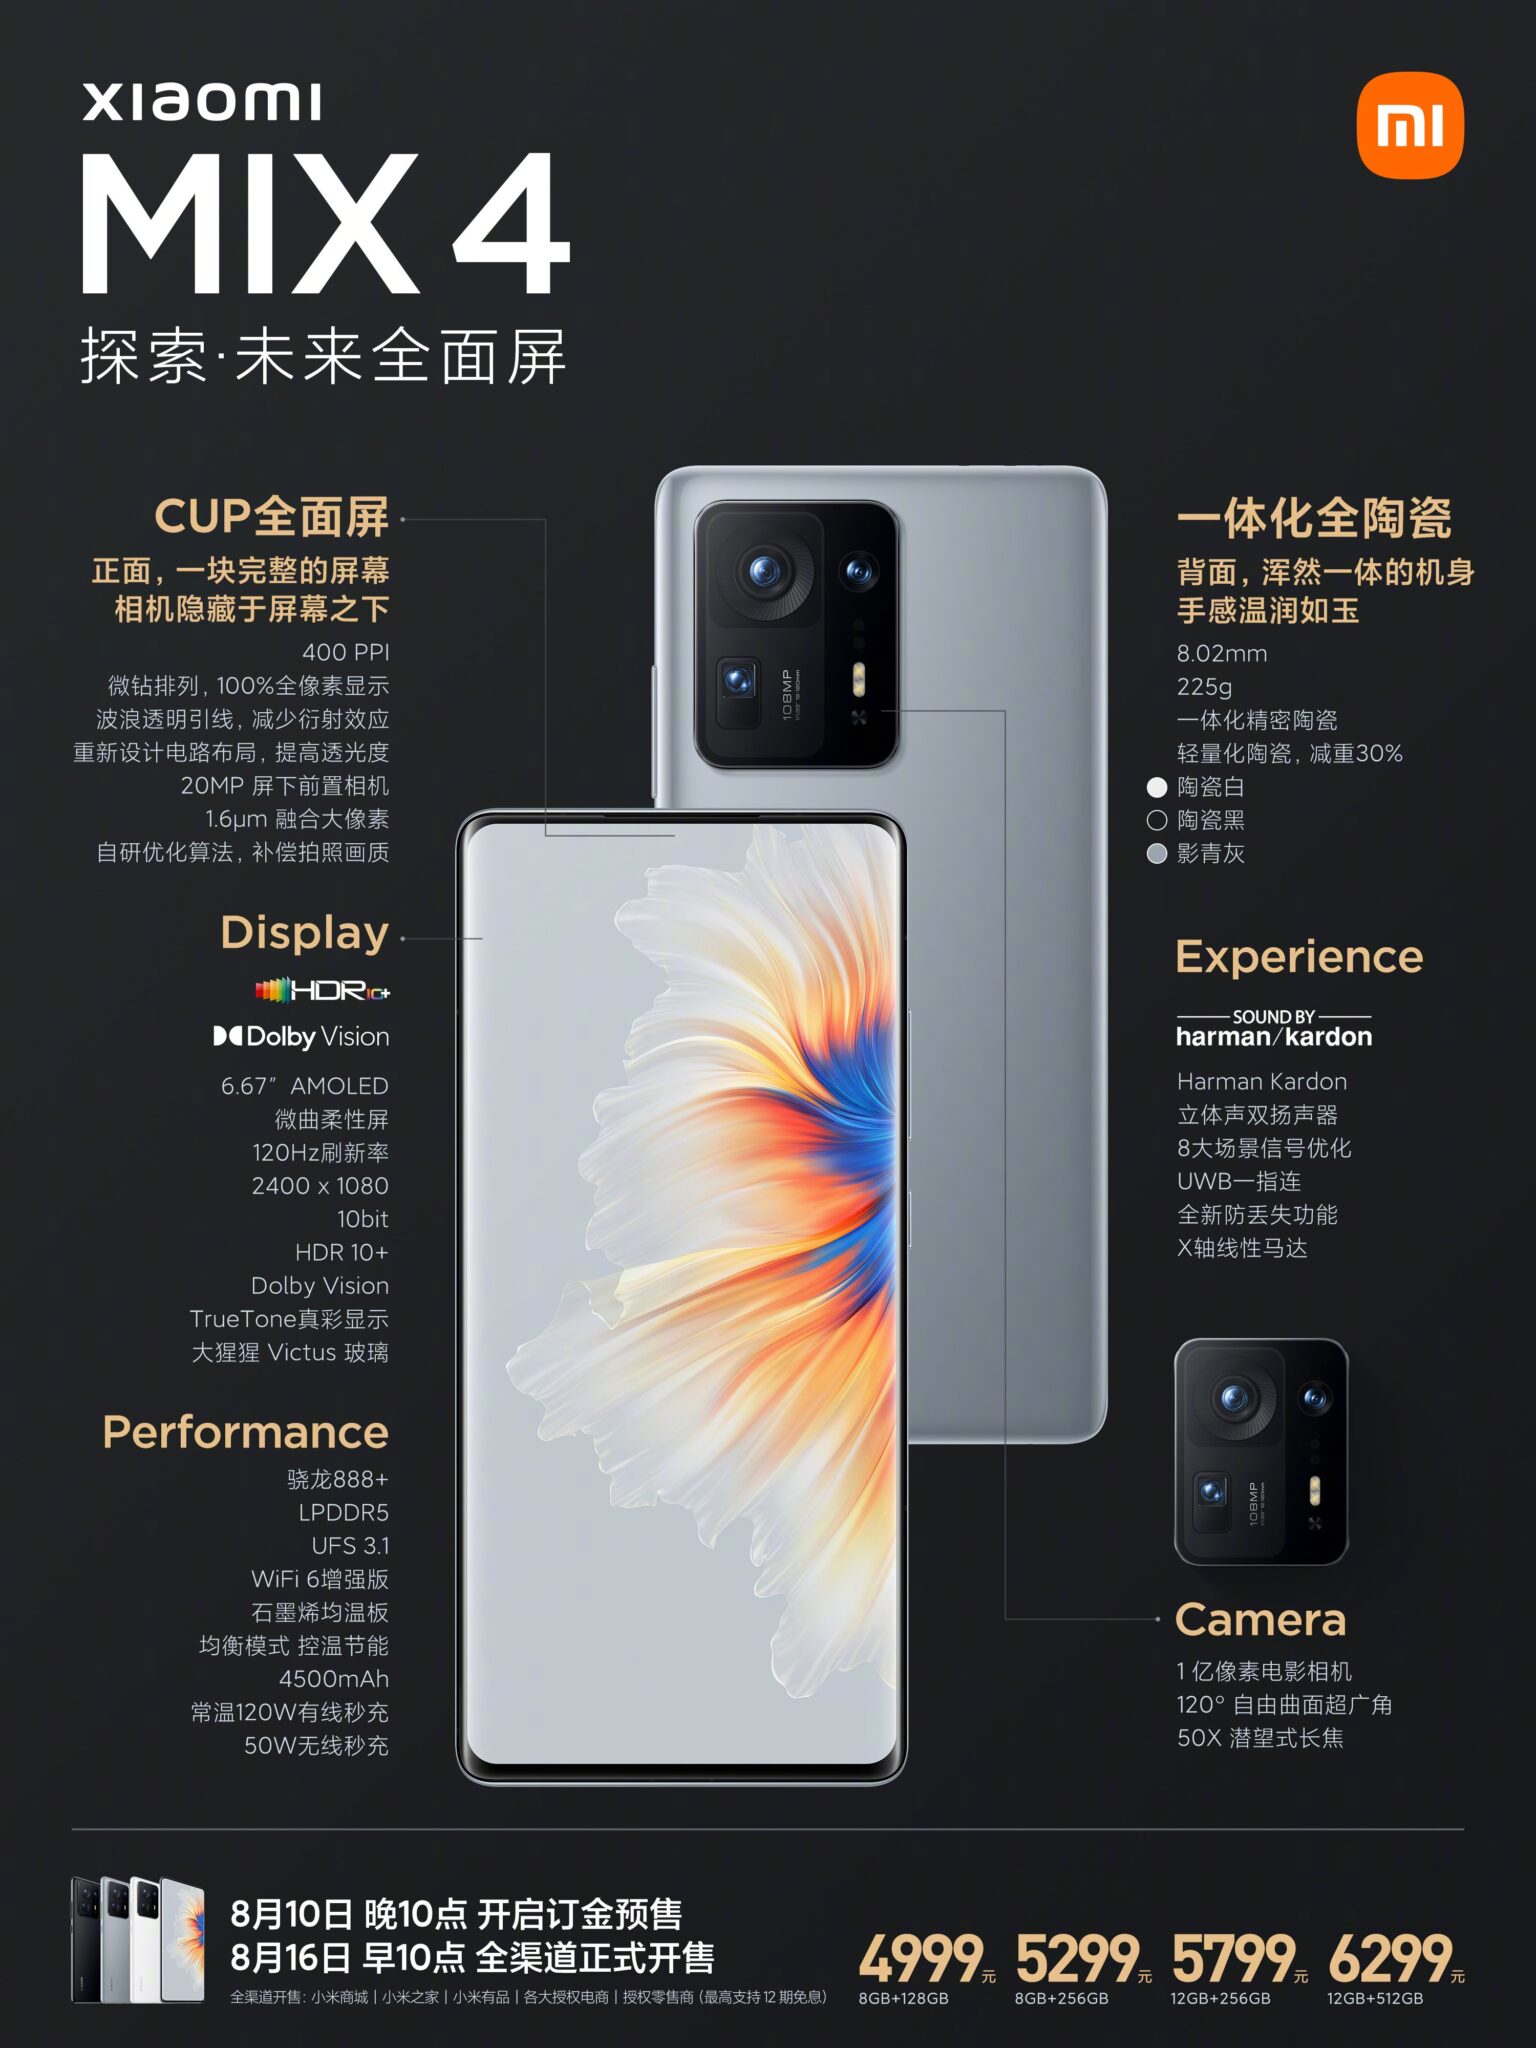 Xiaomi MI Mix 4 – Specifications and Features